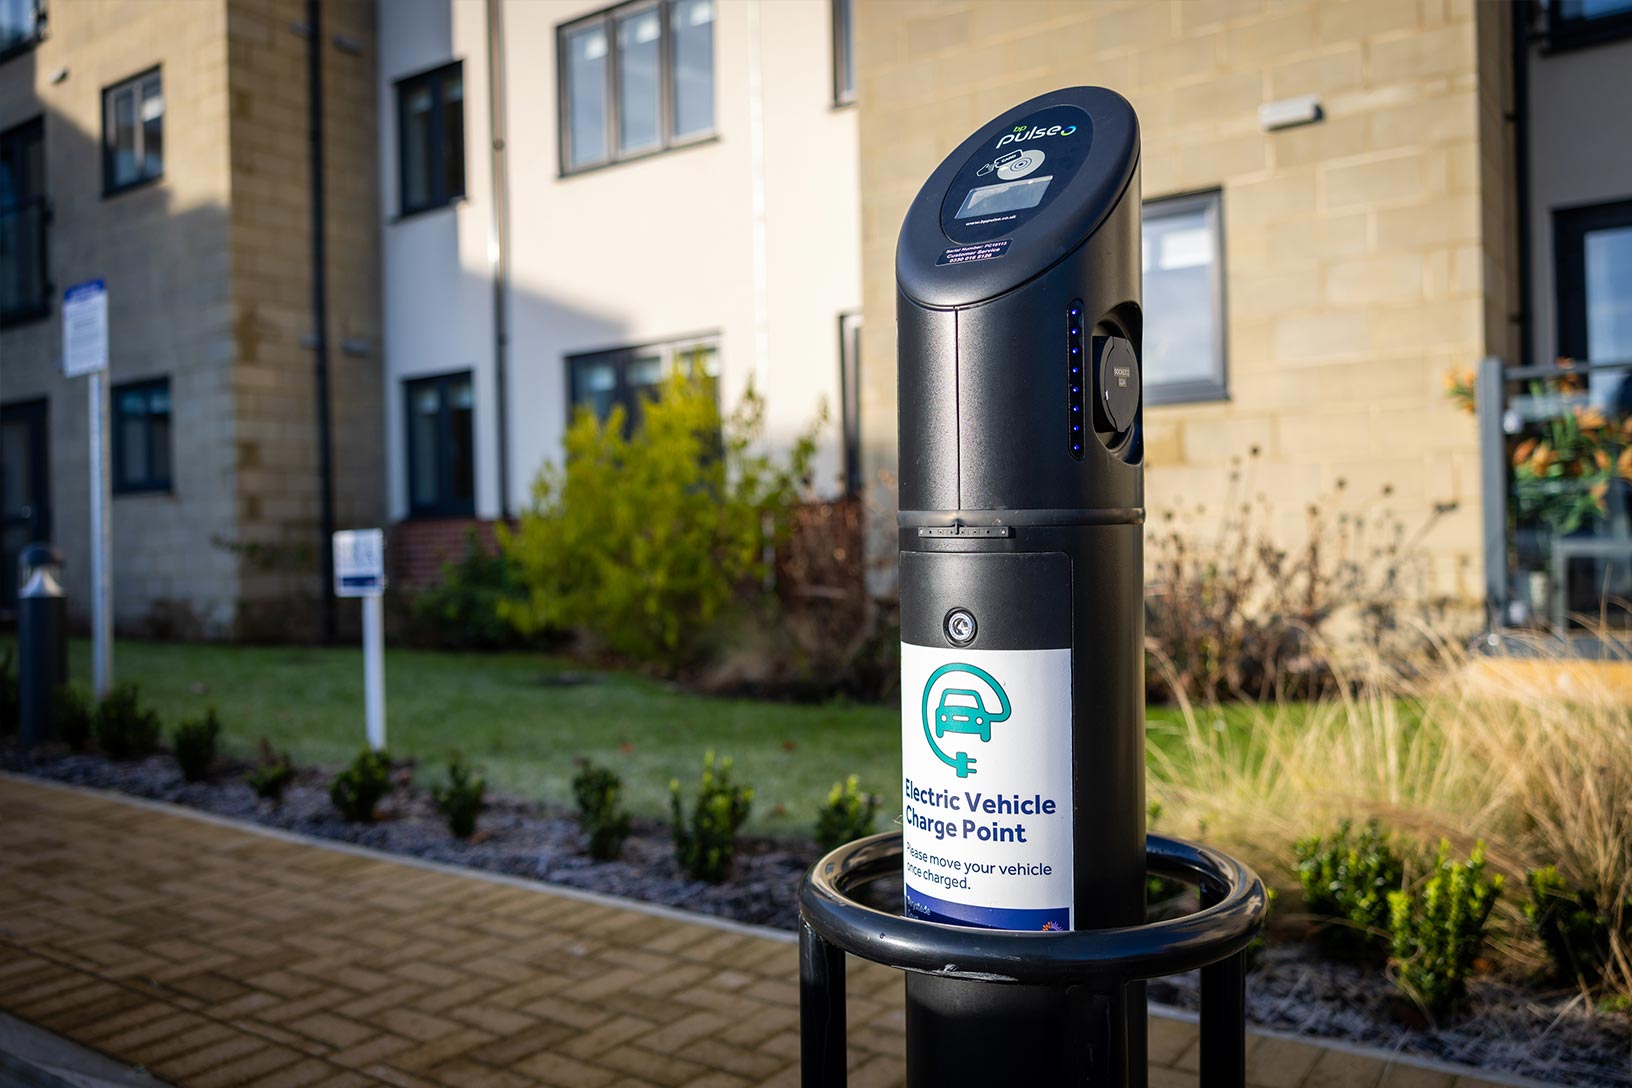 Anchor The Standards - Berystede Court, electric car charging point in the car park